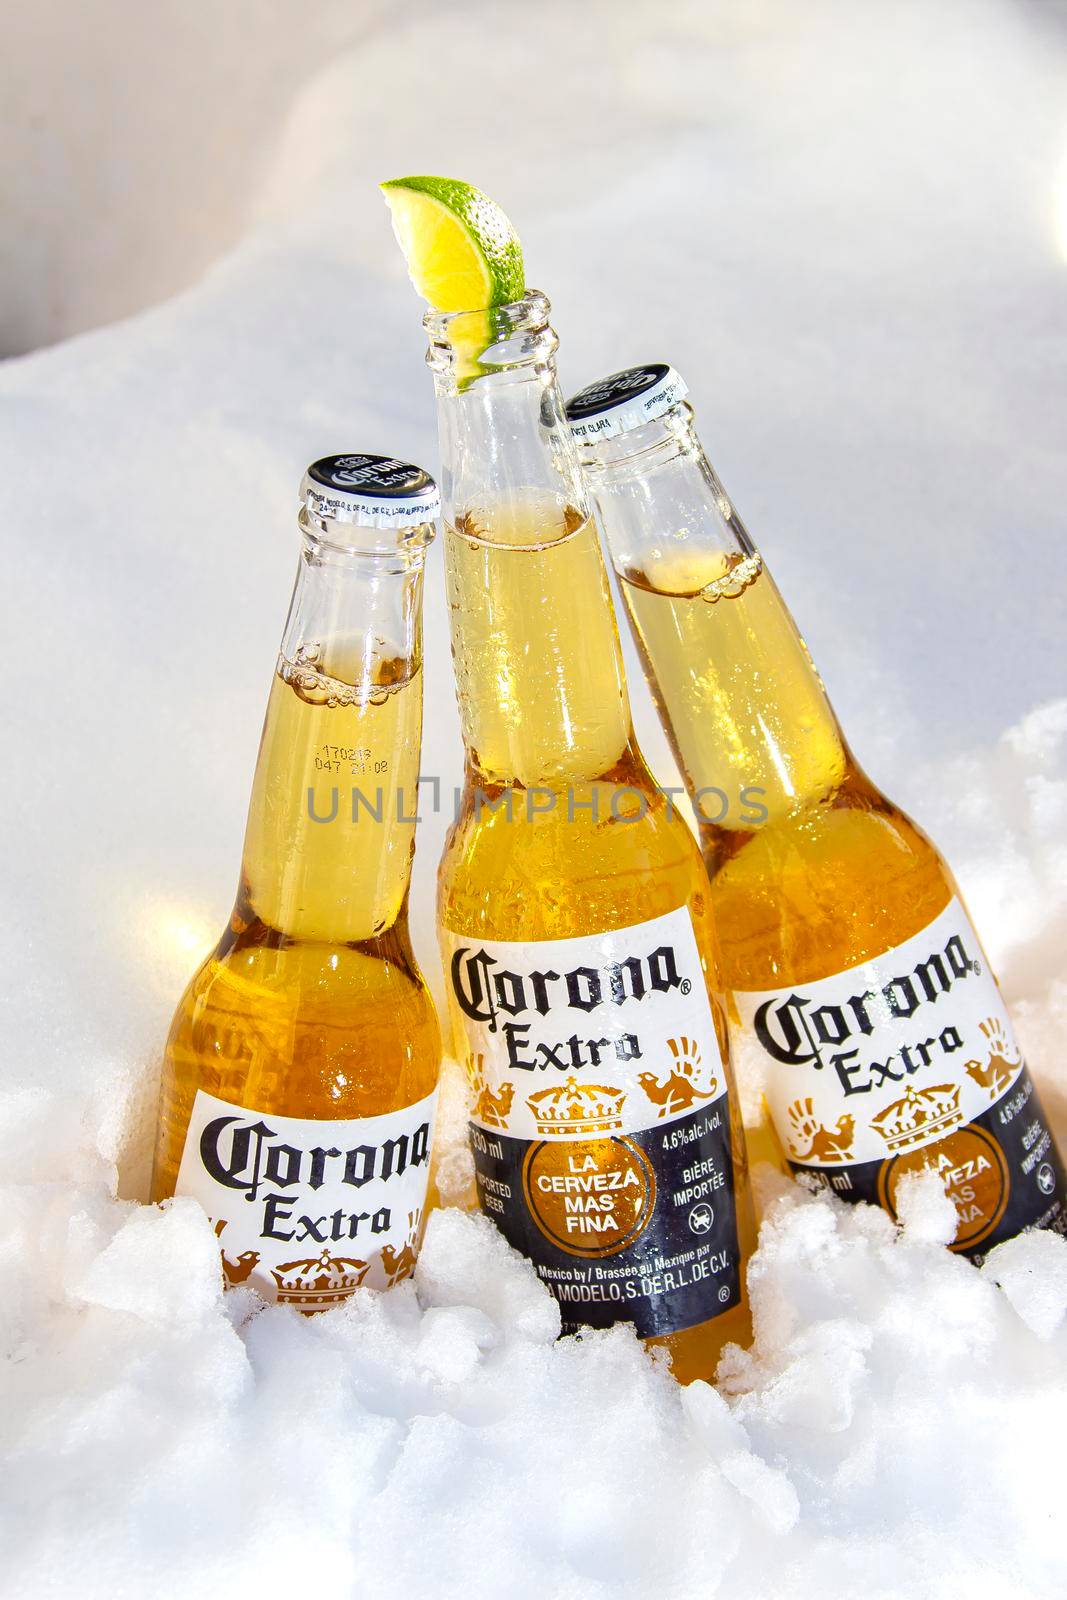 Calgary AB, Canada. October 1, 2019. three Corona beer bottles with lime on ice snow, full view. by oasisamuel